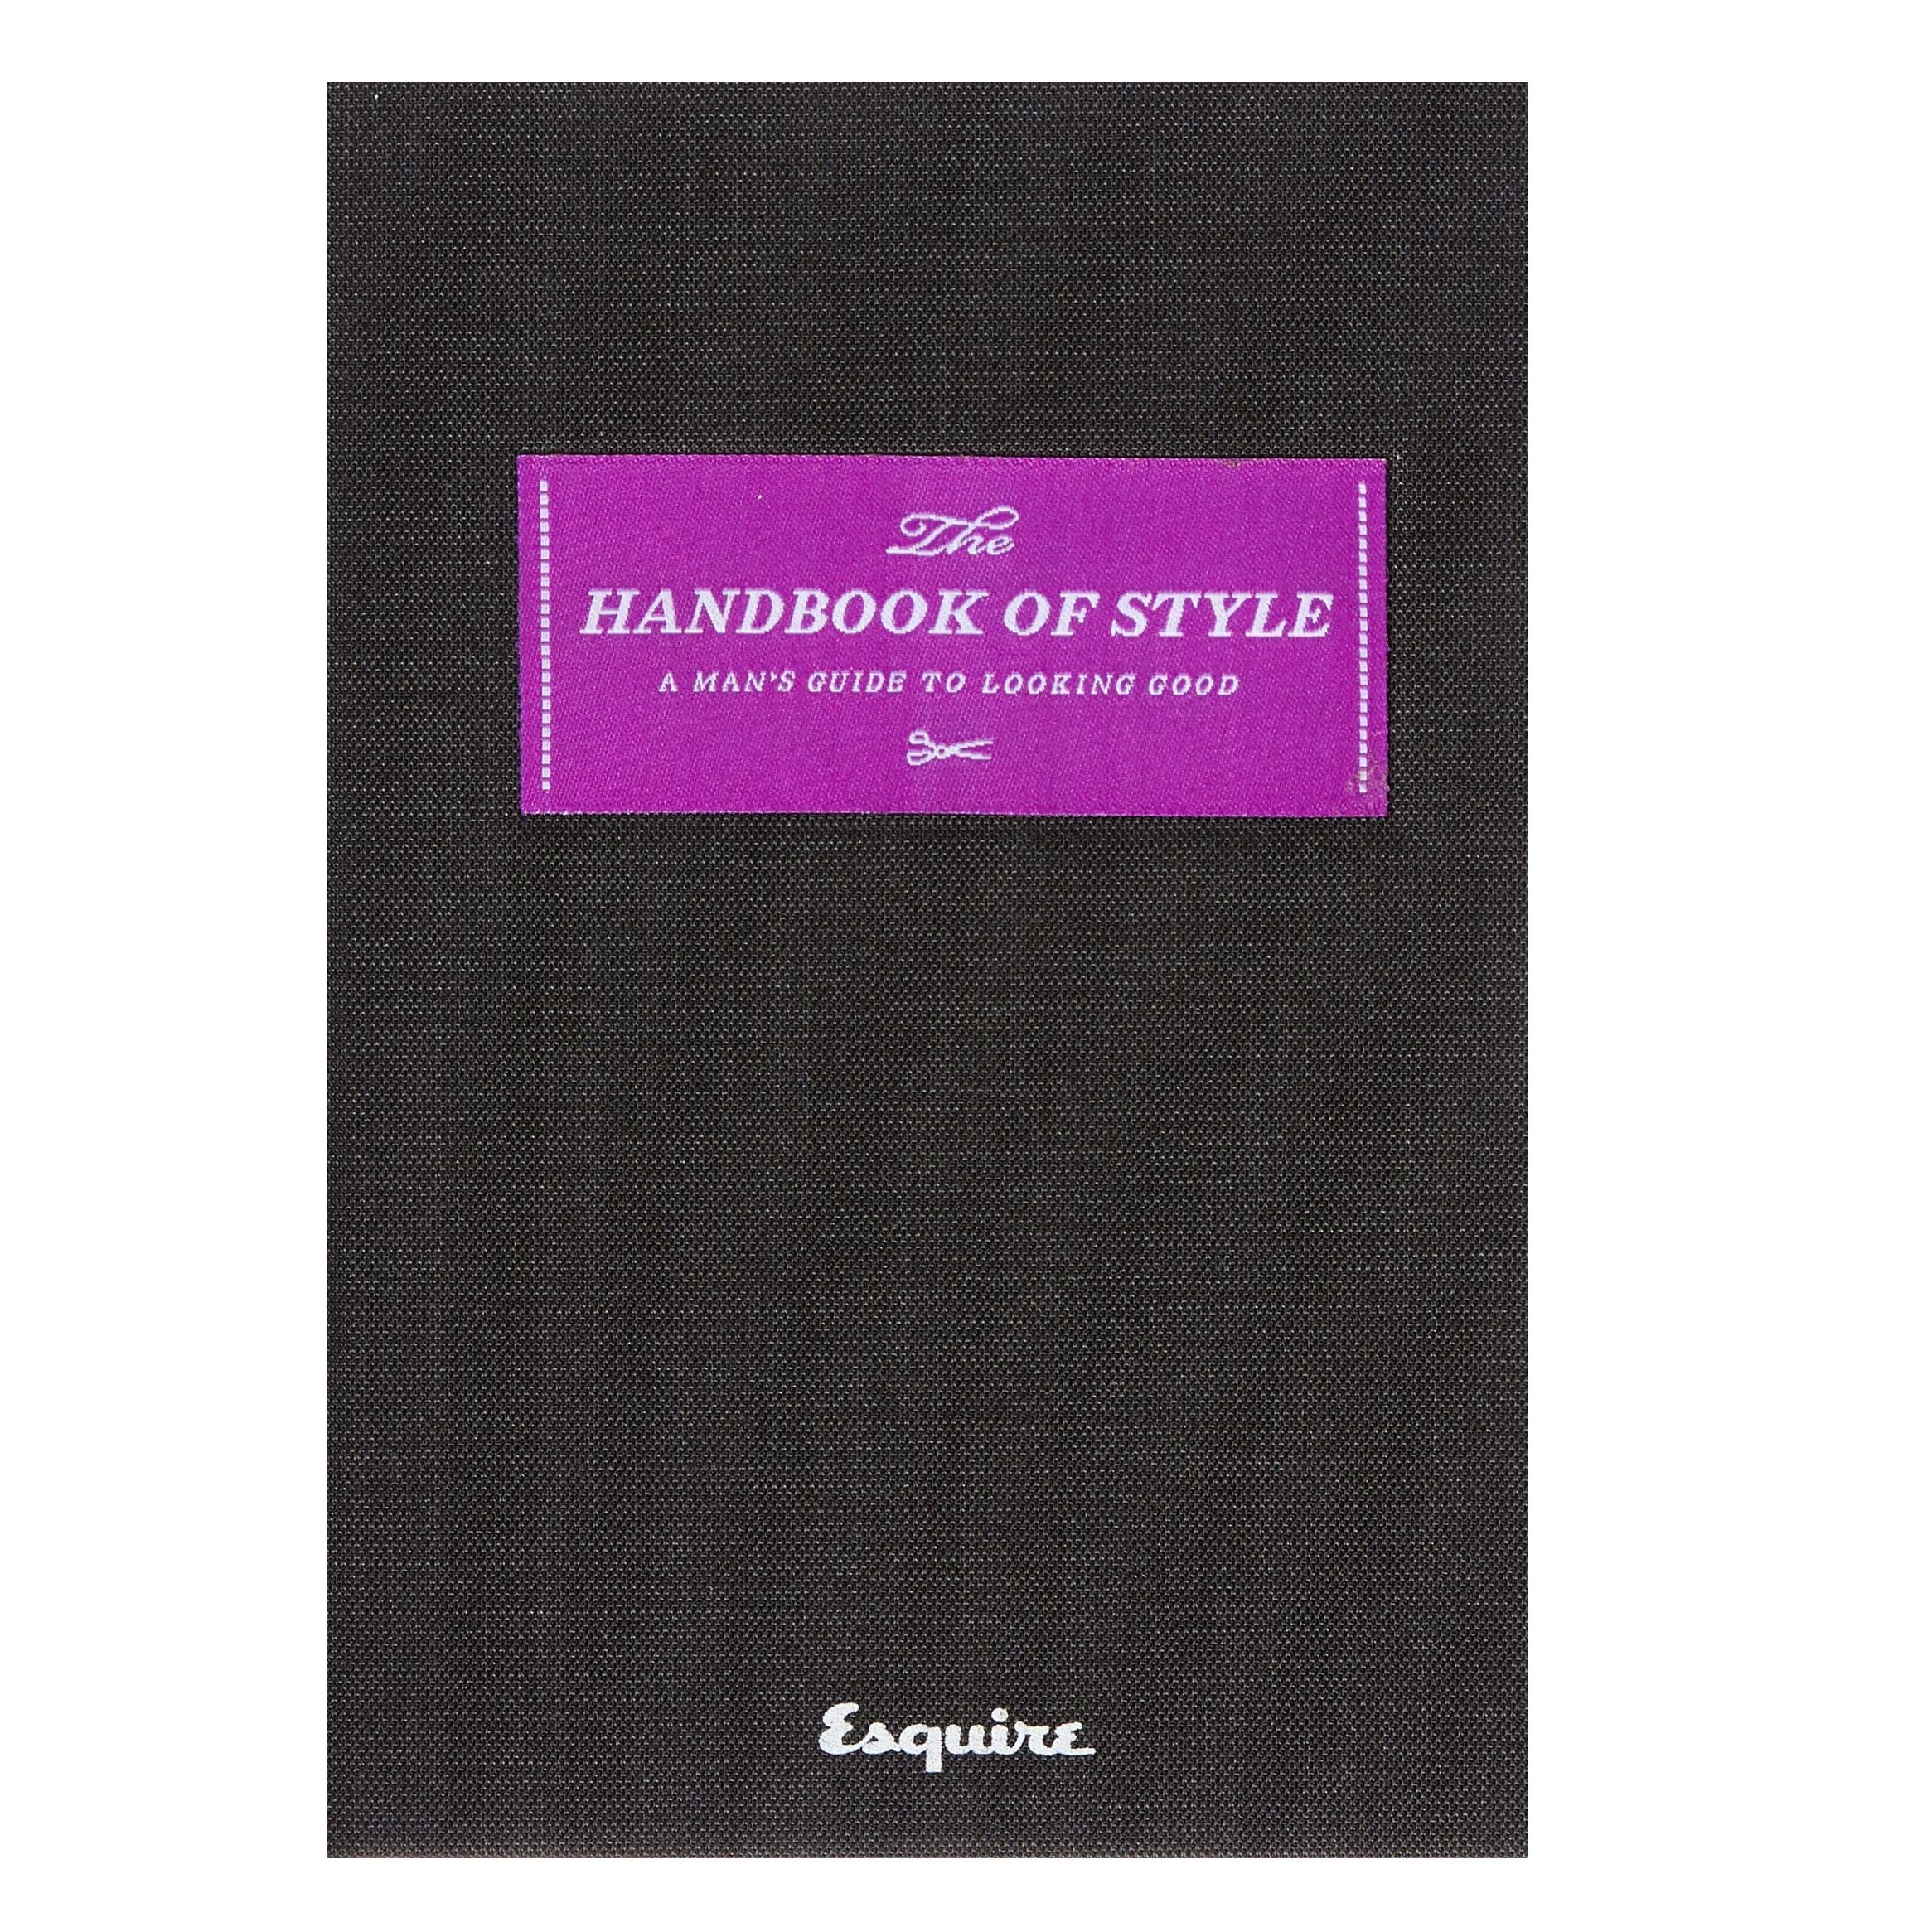 The Handbook of Style: A Man's Guide to Looking Good